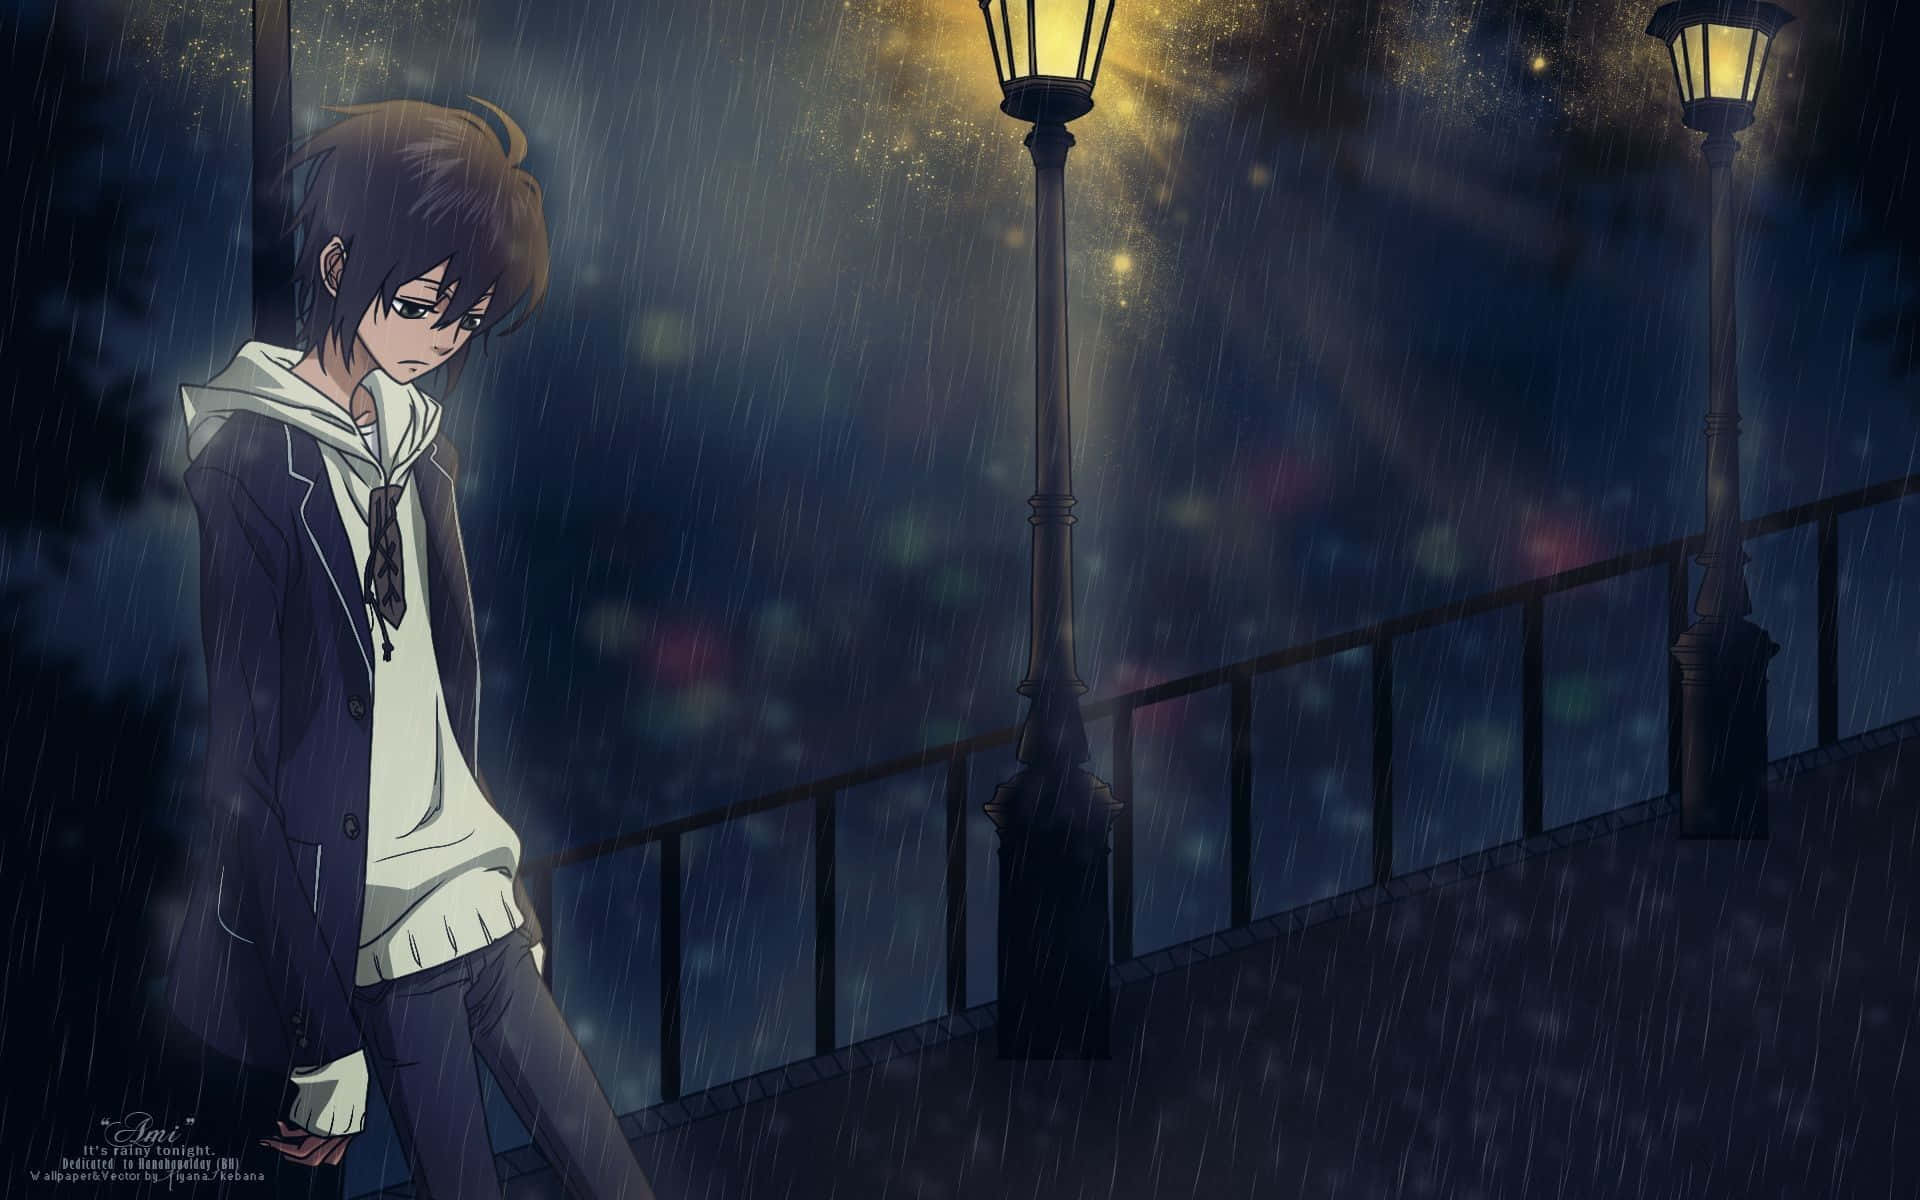 Broken hearts and tears fill the air after a devastating Sad Anime Death Wallpaper